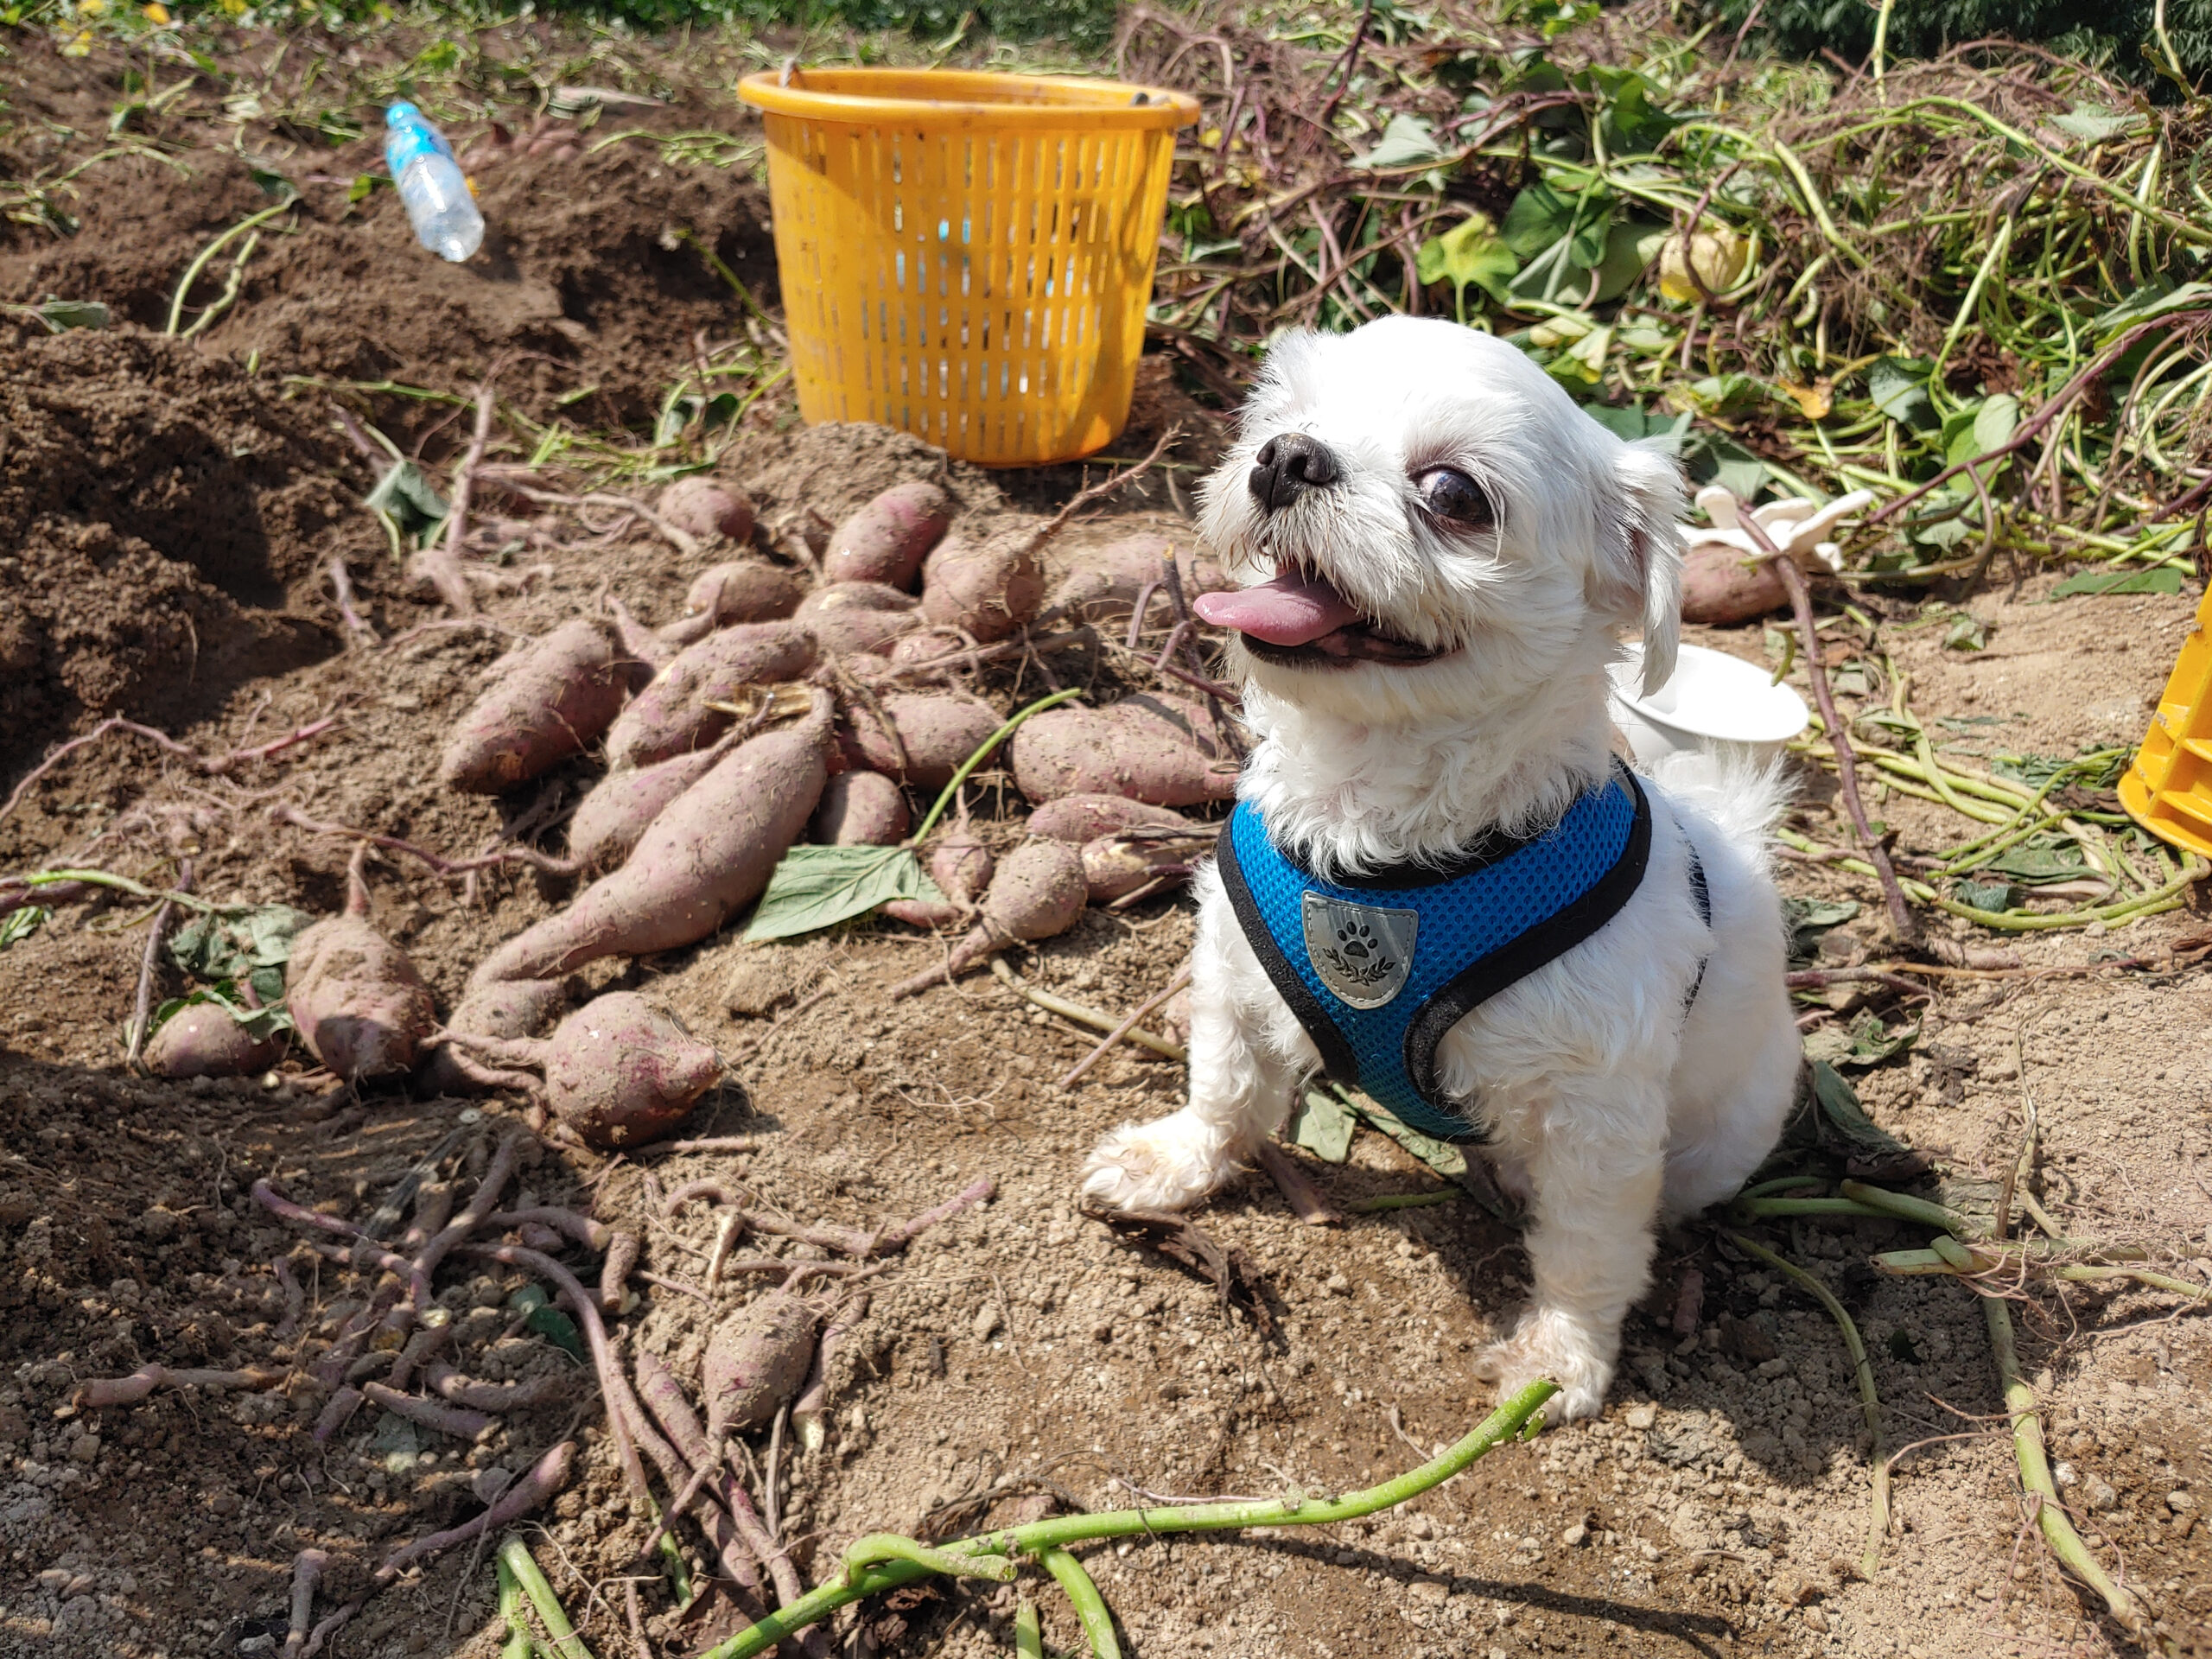 A,Puppy,Playing,In,A,Sweet,Potato,Field,In,A